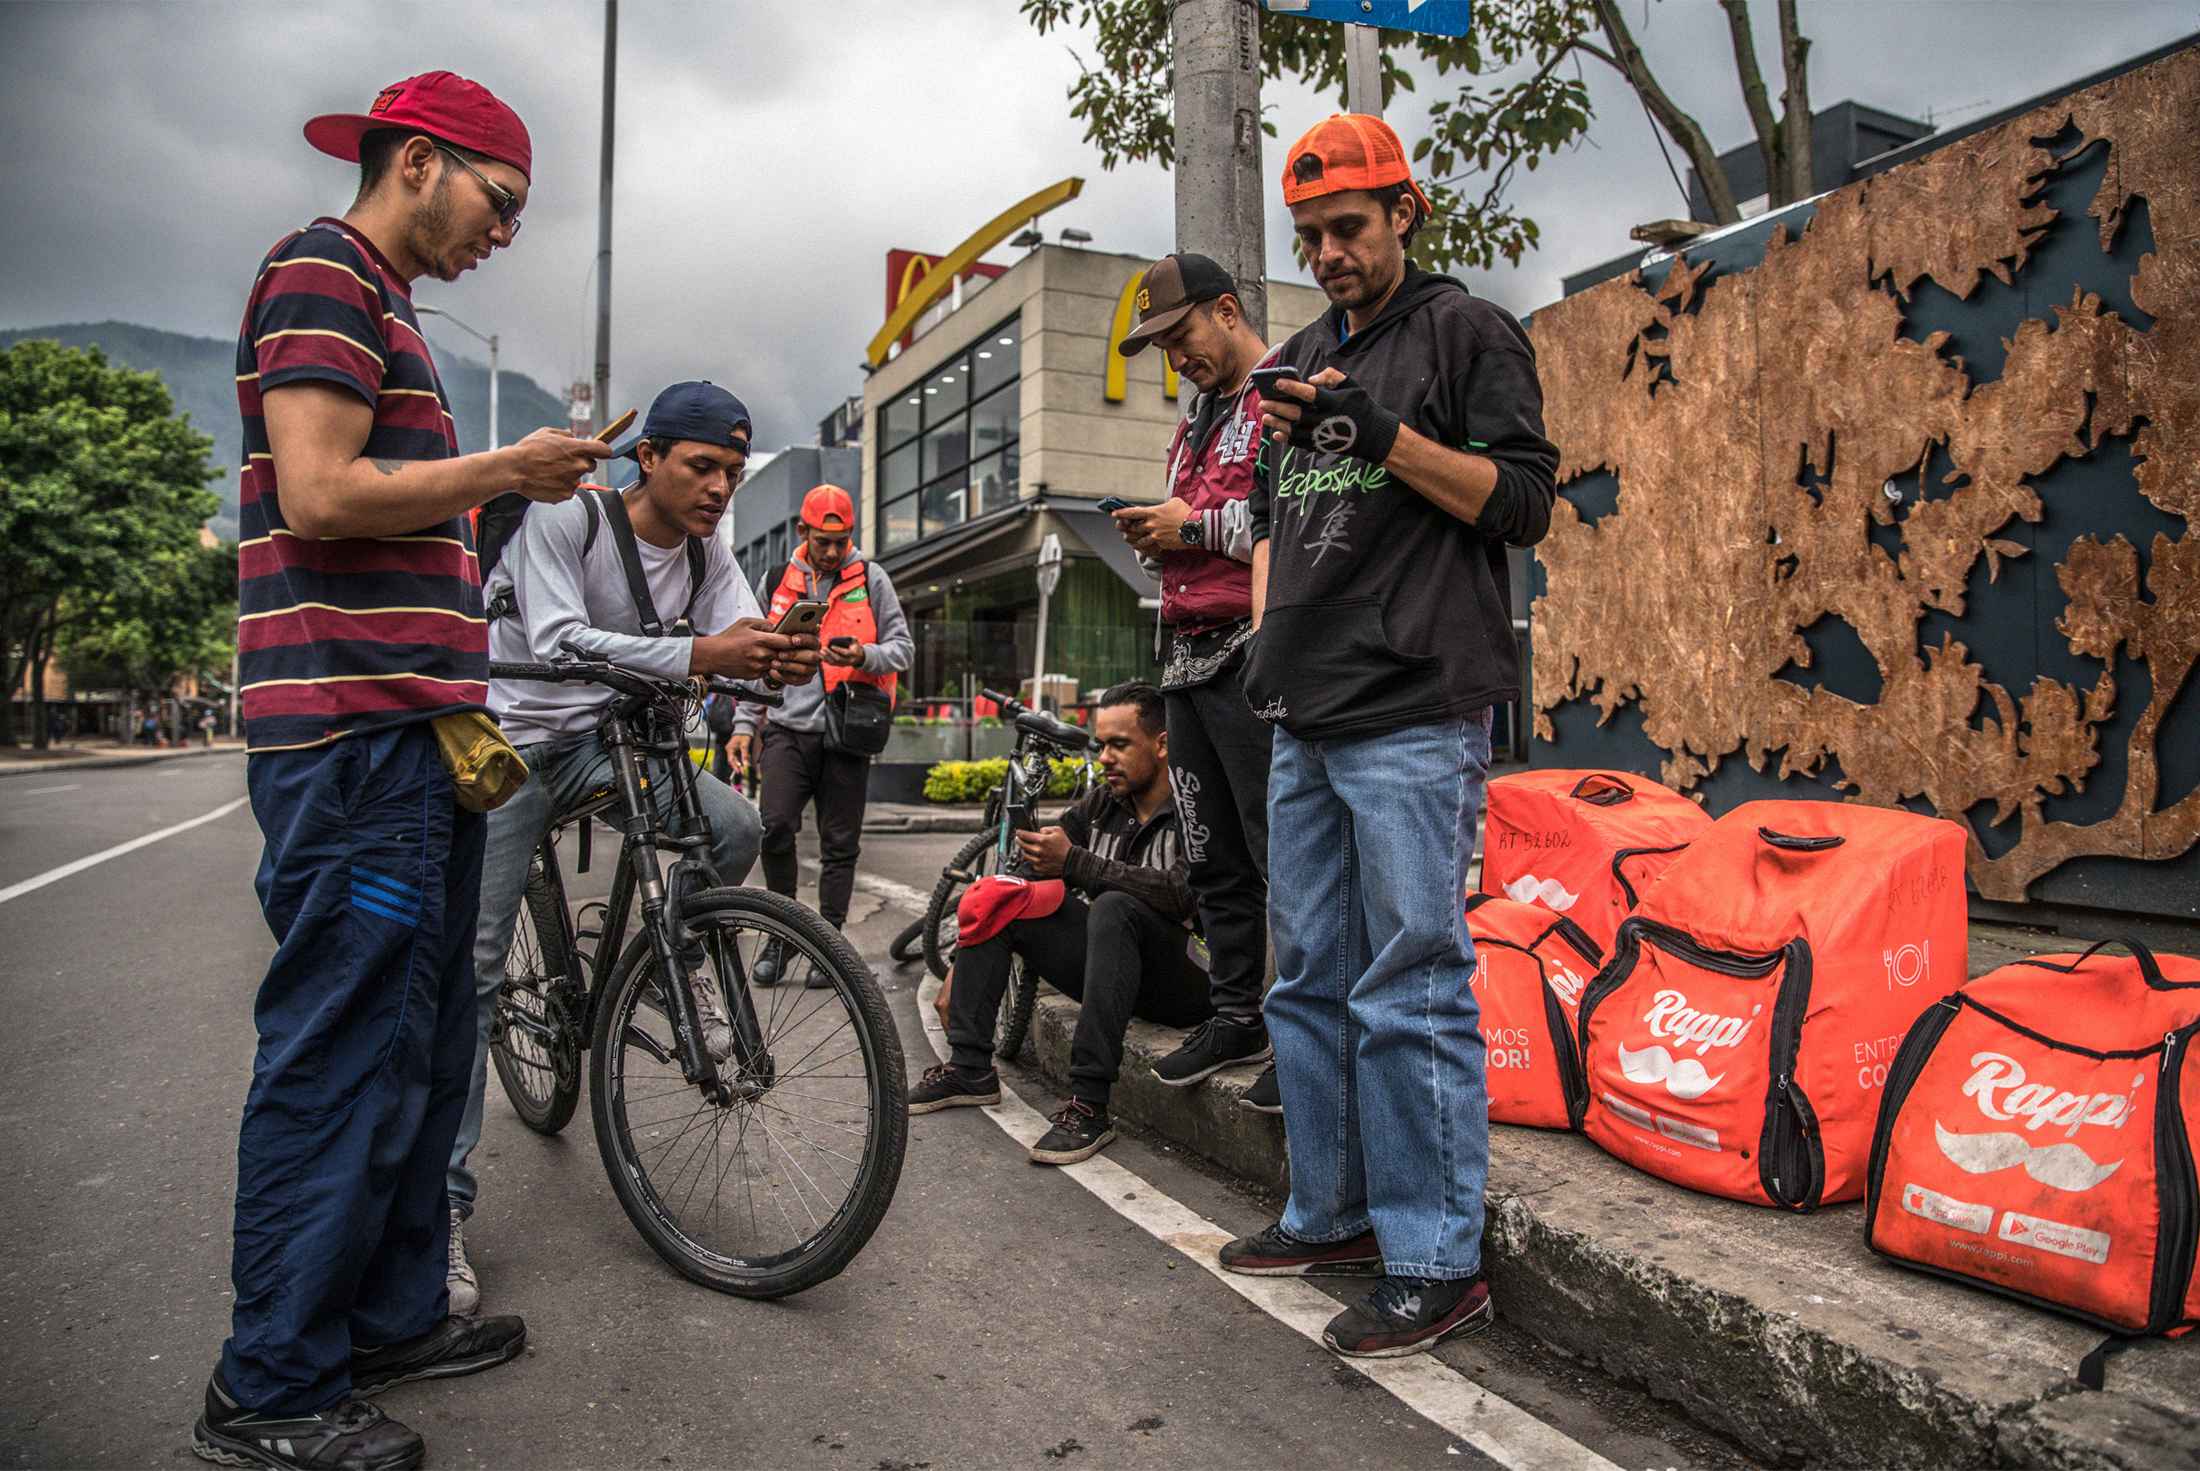 Rappi couriers in Bogotá await their next assignment.